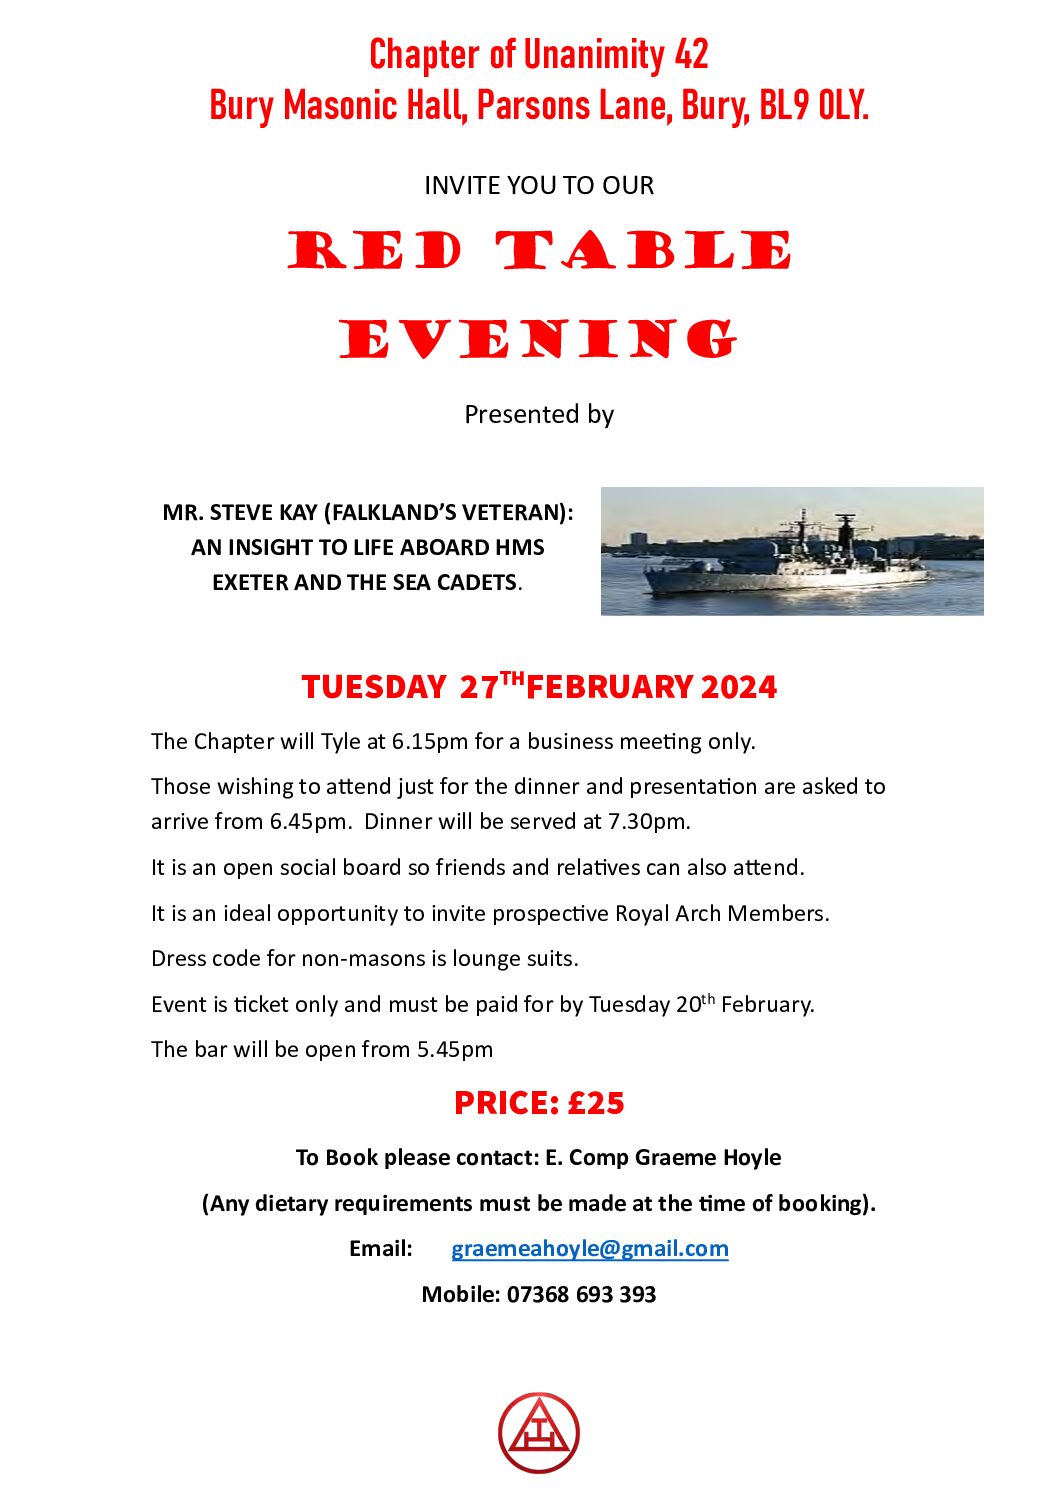 TUESDAY 27TH FEBRUARY – CHAPTER OF UNANIMITY 42 HOST A RED TABLE EVENT